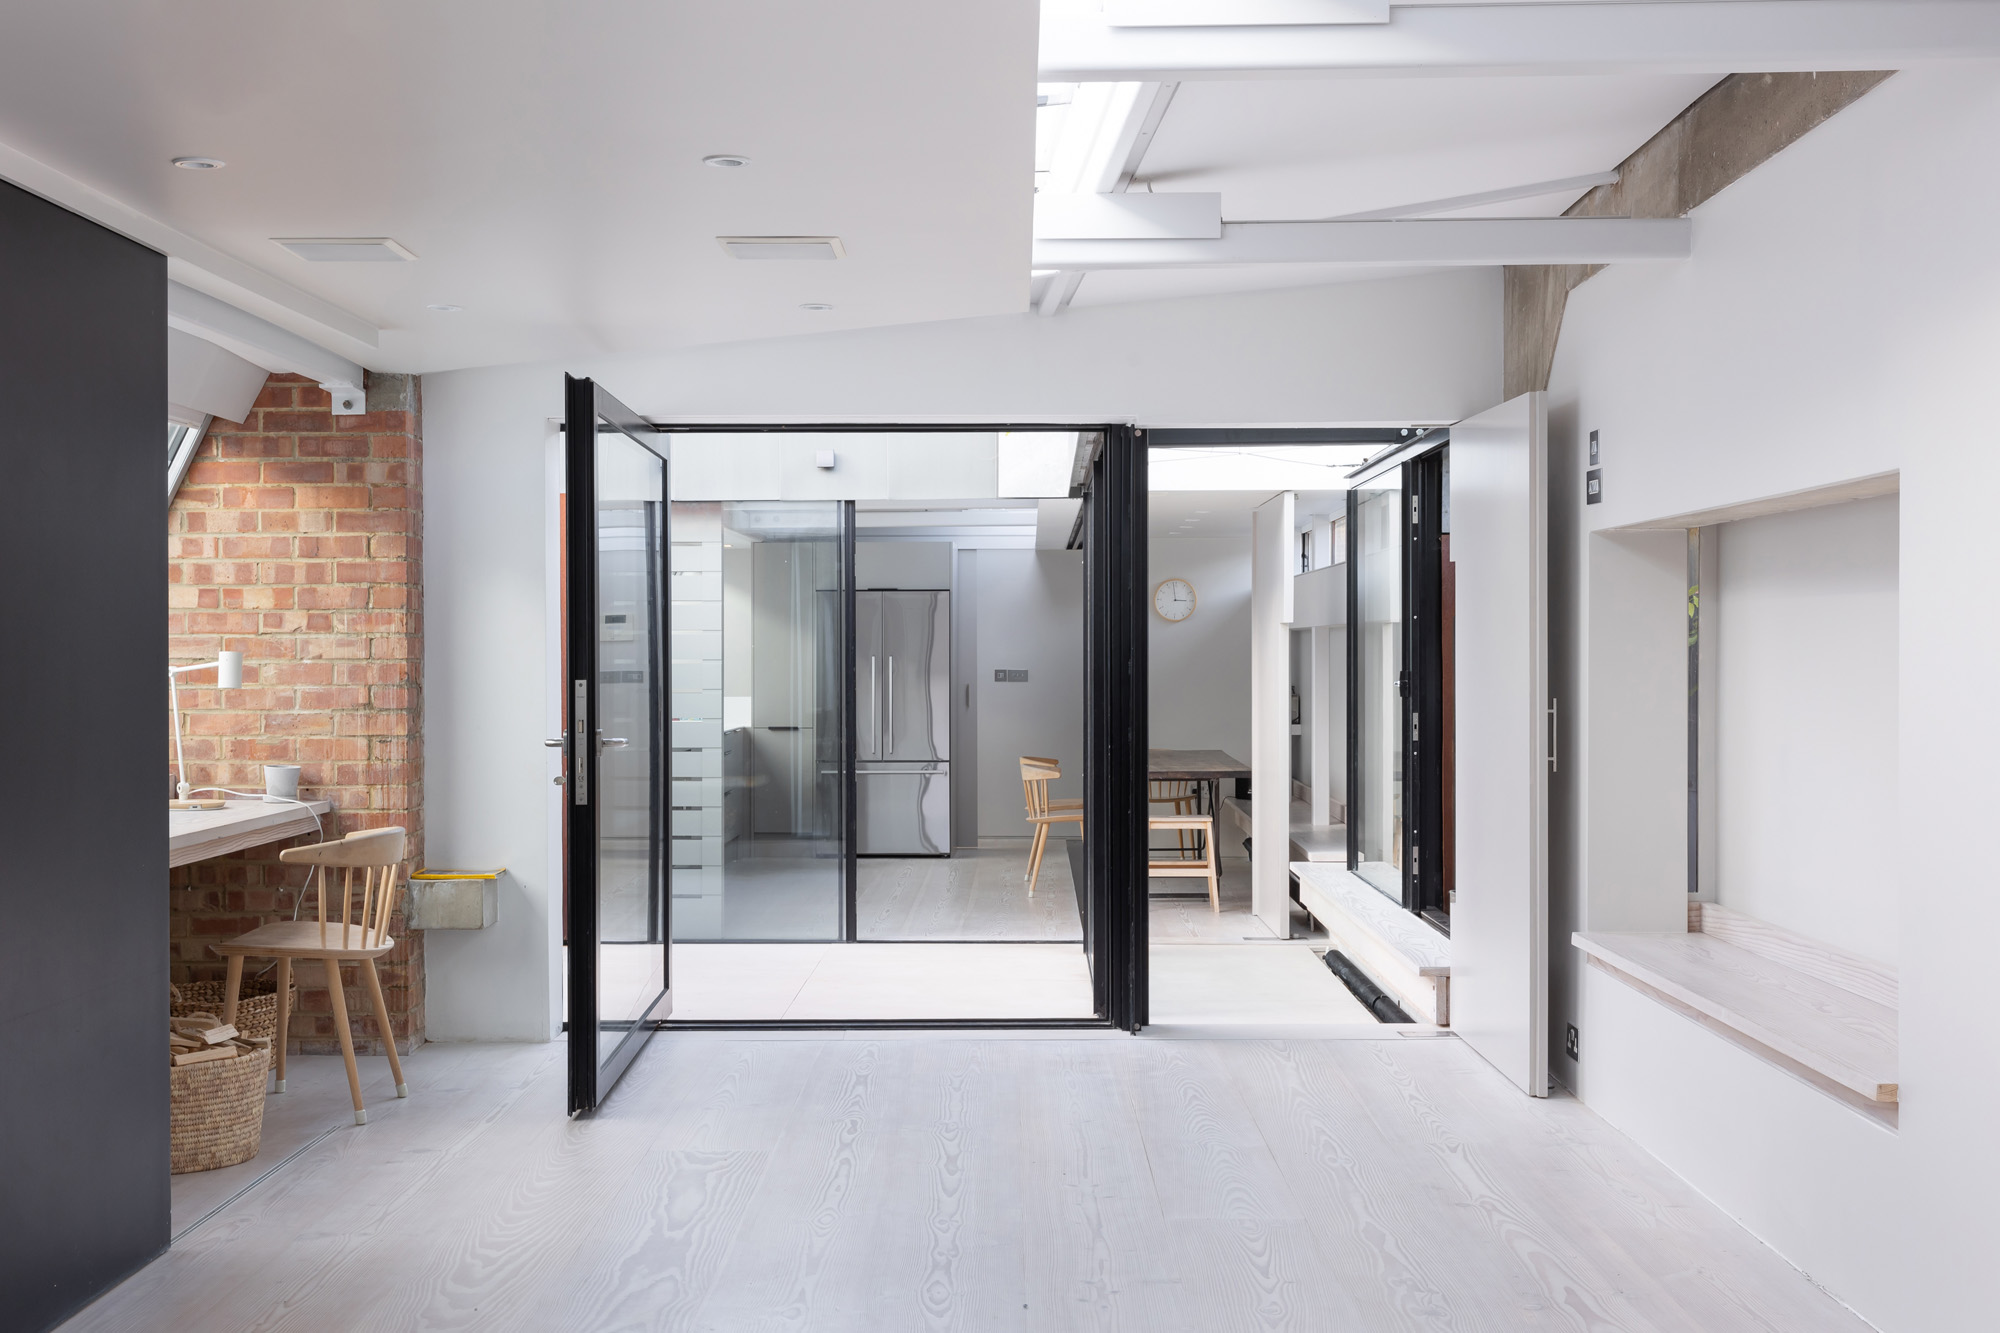 For Rent: Vernon Yard Notting Hill W11 - contemporary architecture with folding glass doors and brick walls